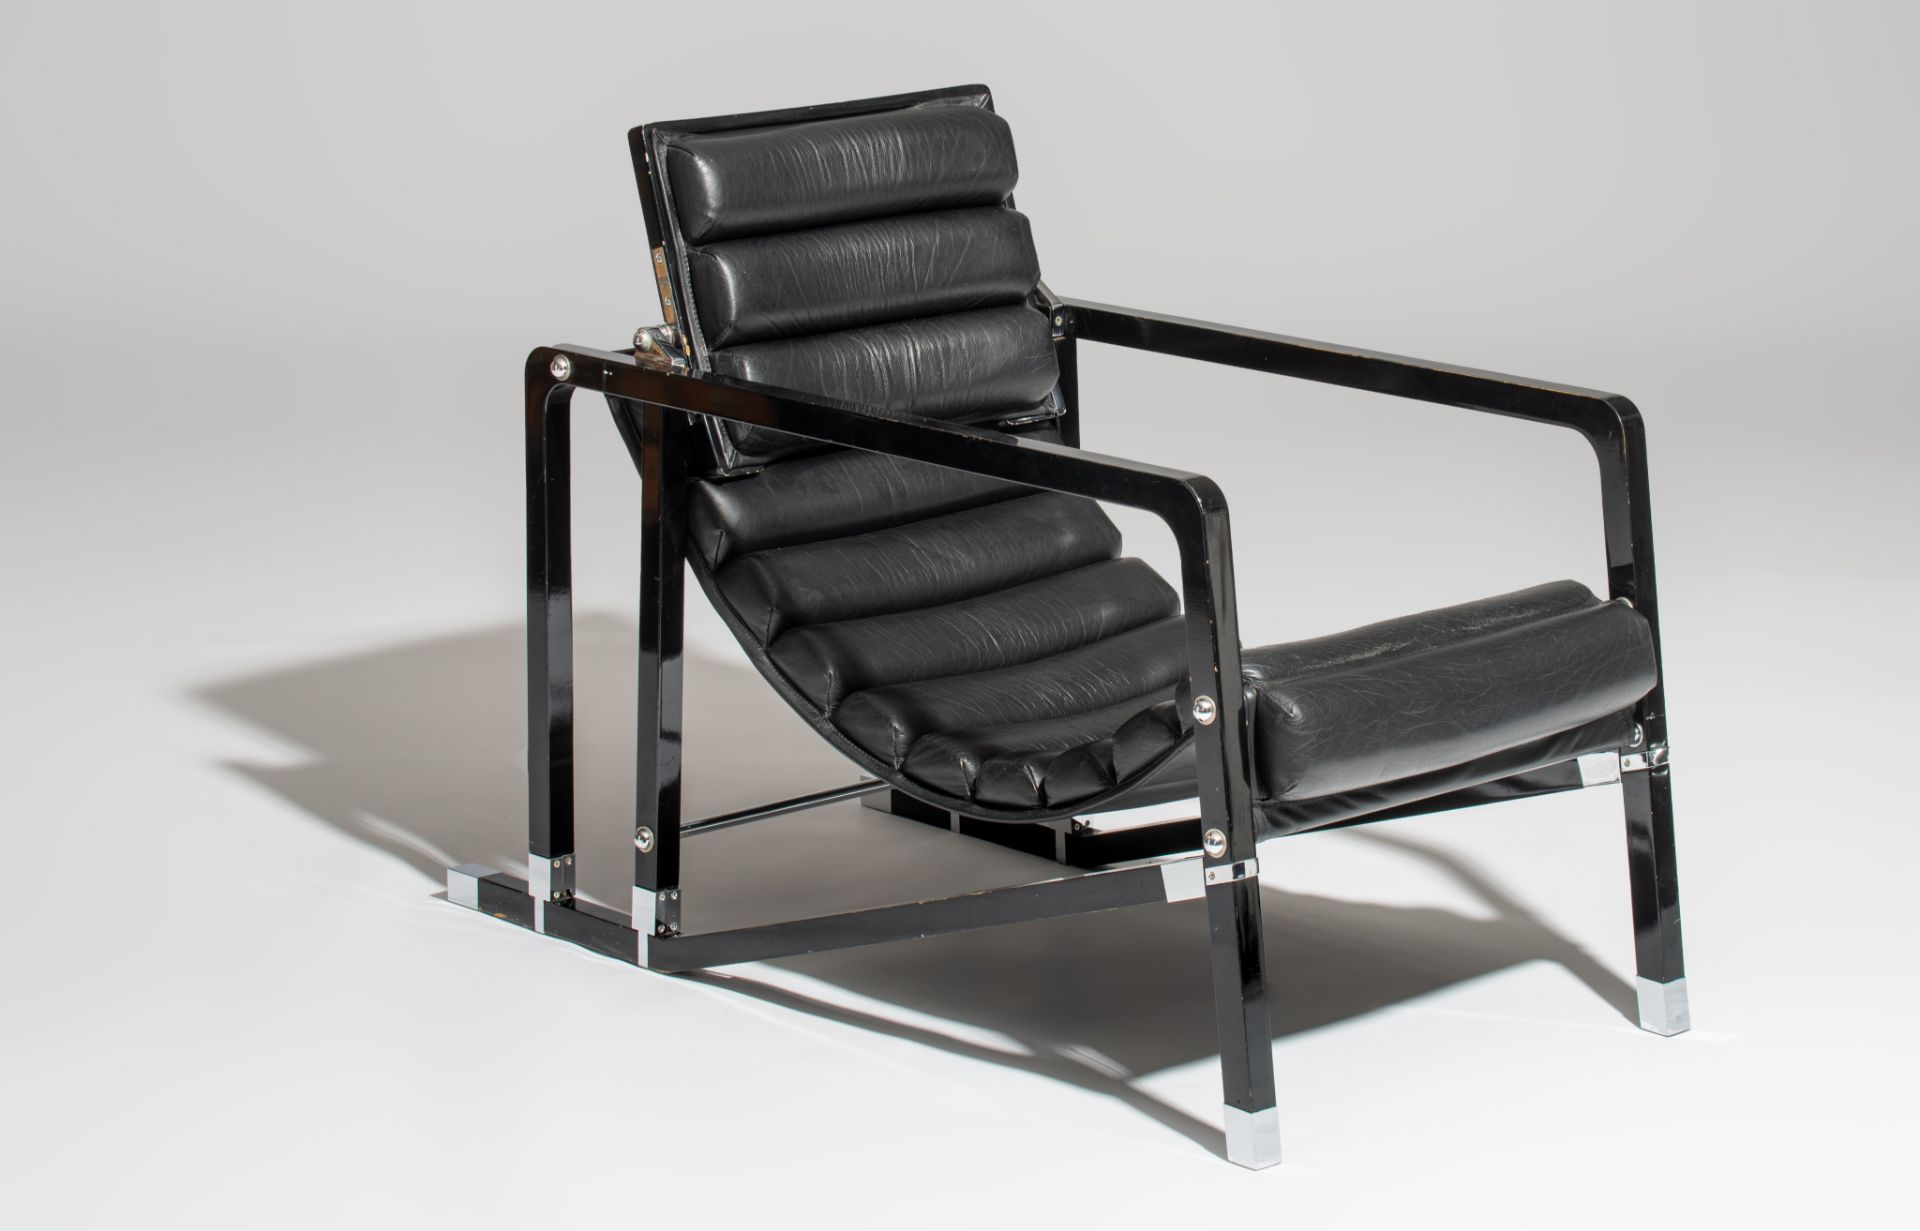 A Transat chair by Eileen Gray for Ecart, France, 1926, H 75 - W 55 - D 108 cm - Image 2 of 10